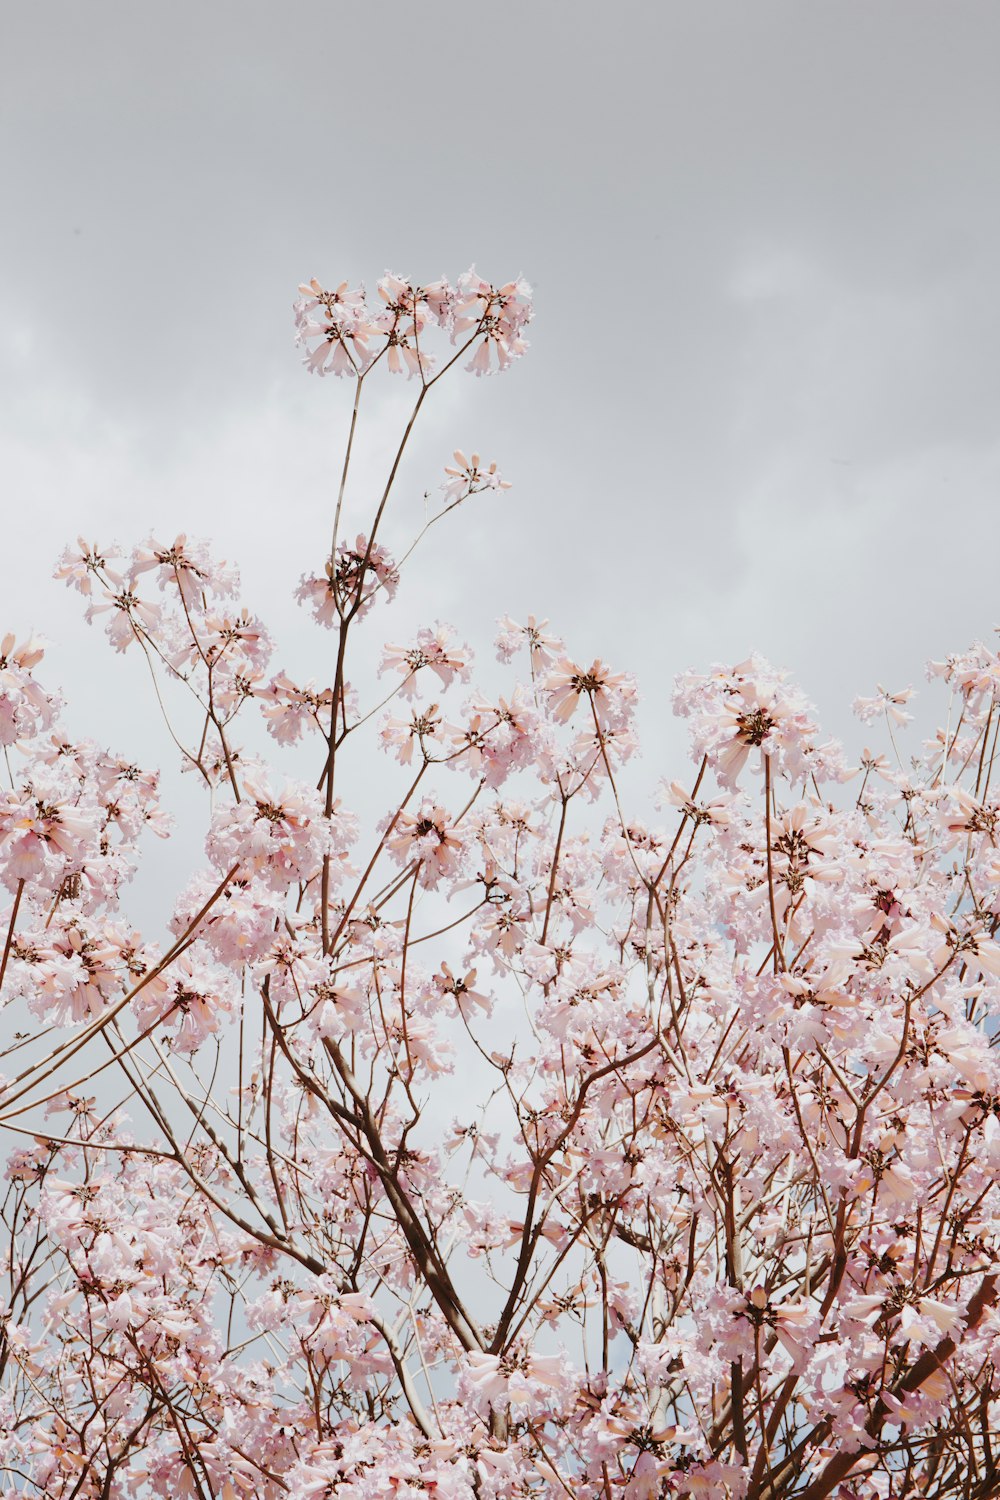 Pale Pink Pictures | Download Free Images on Unsplash